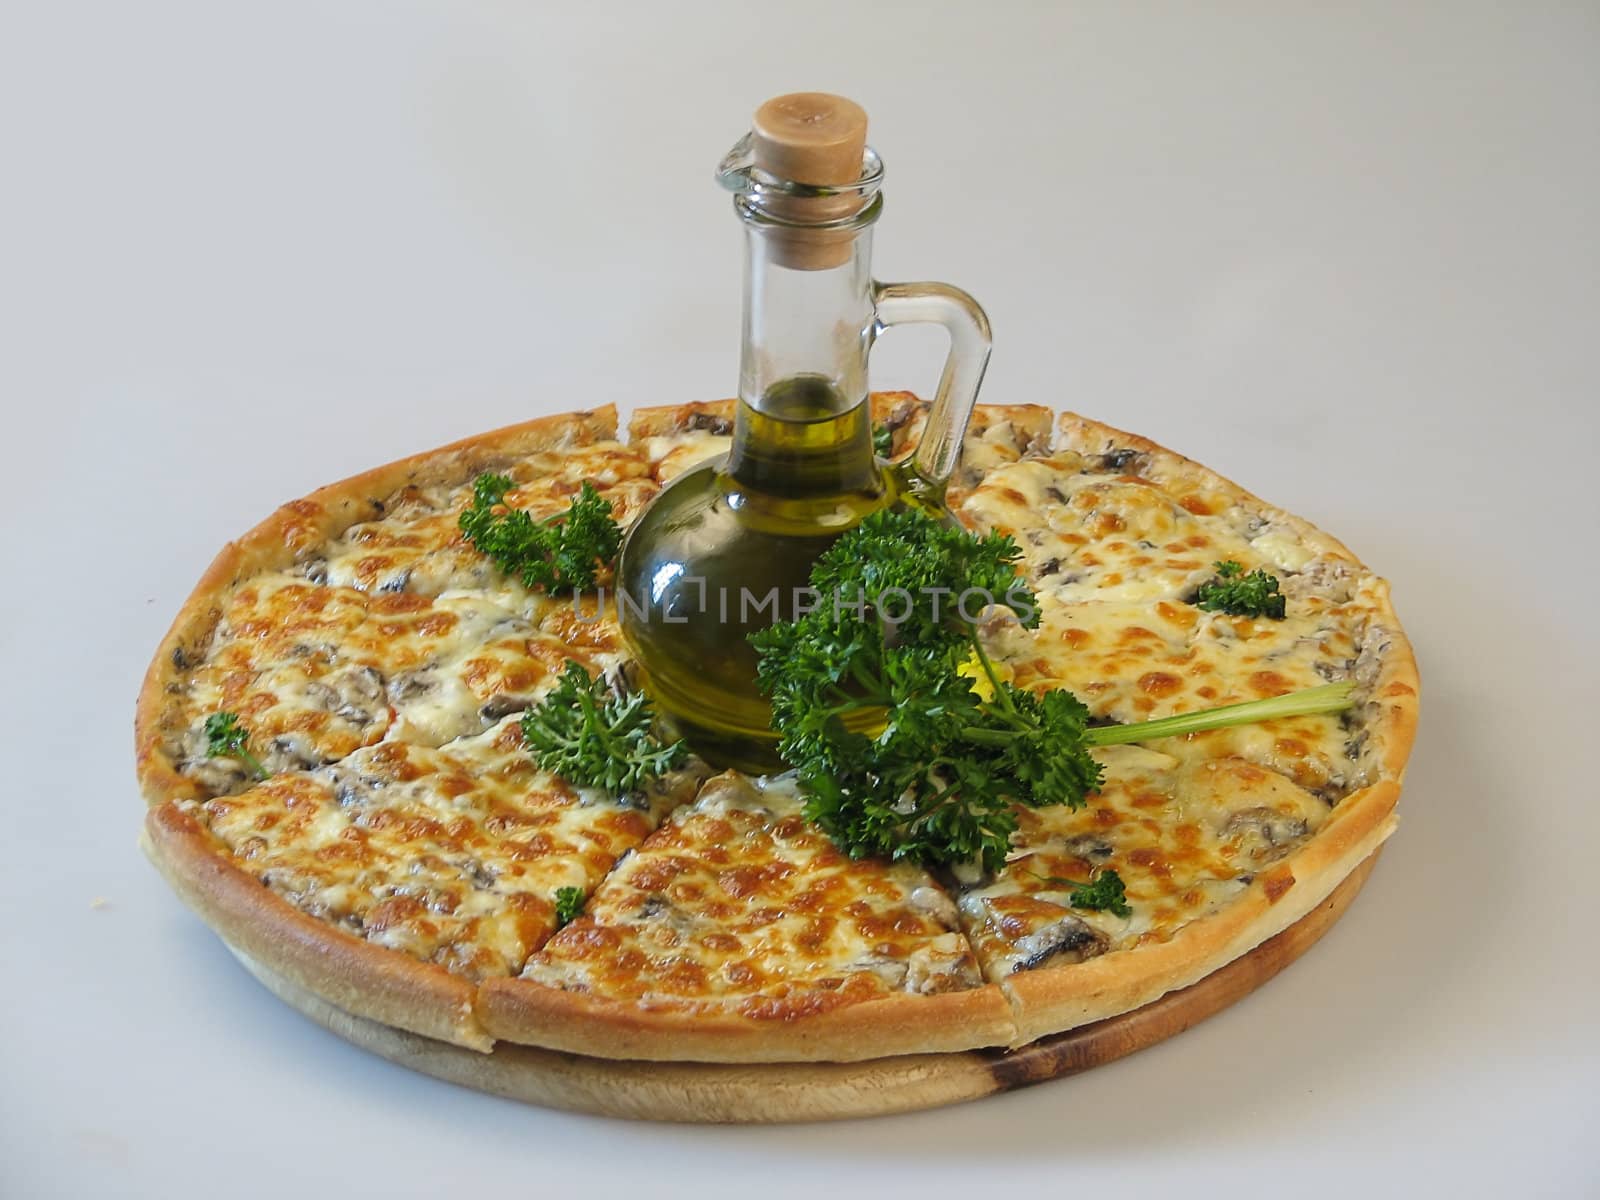 Pizza with a jug of oil and a bunch of greens in the center